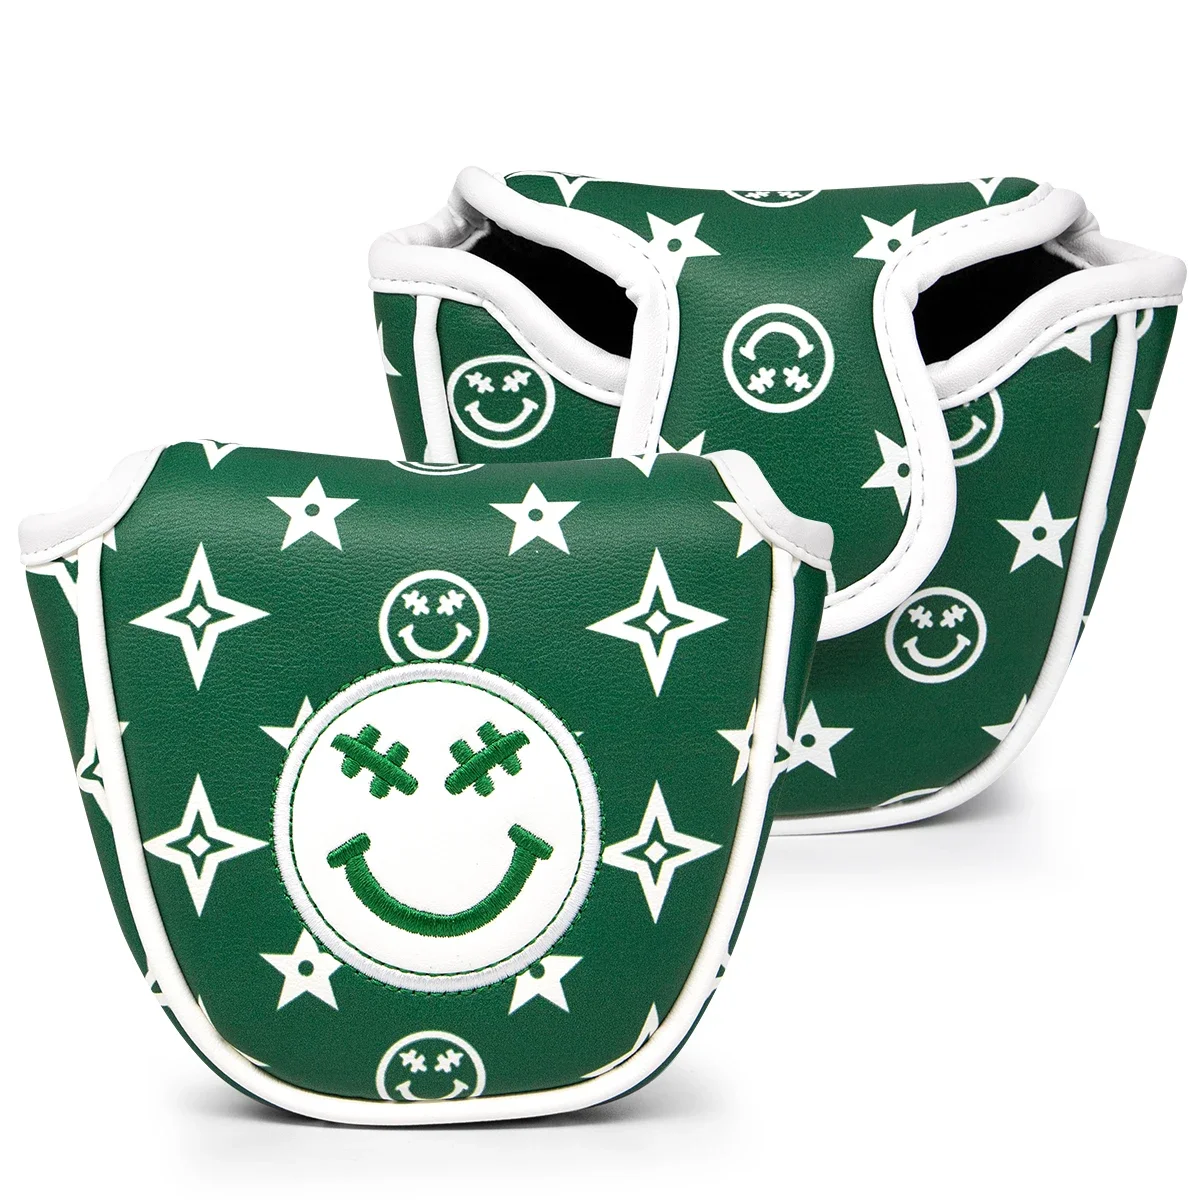 

Free Shipping New Semicircular Slotted Smil Face Golf Putter Club Head Cover Golf Accessories